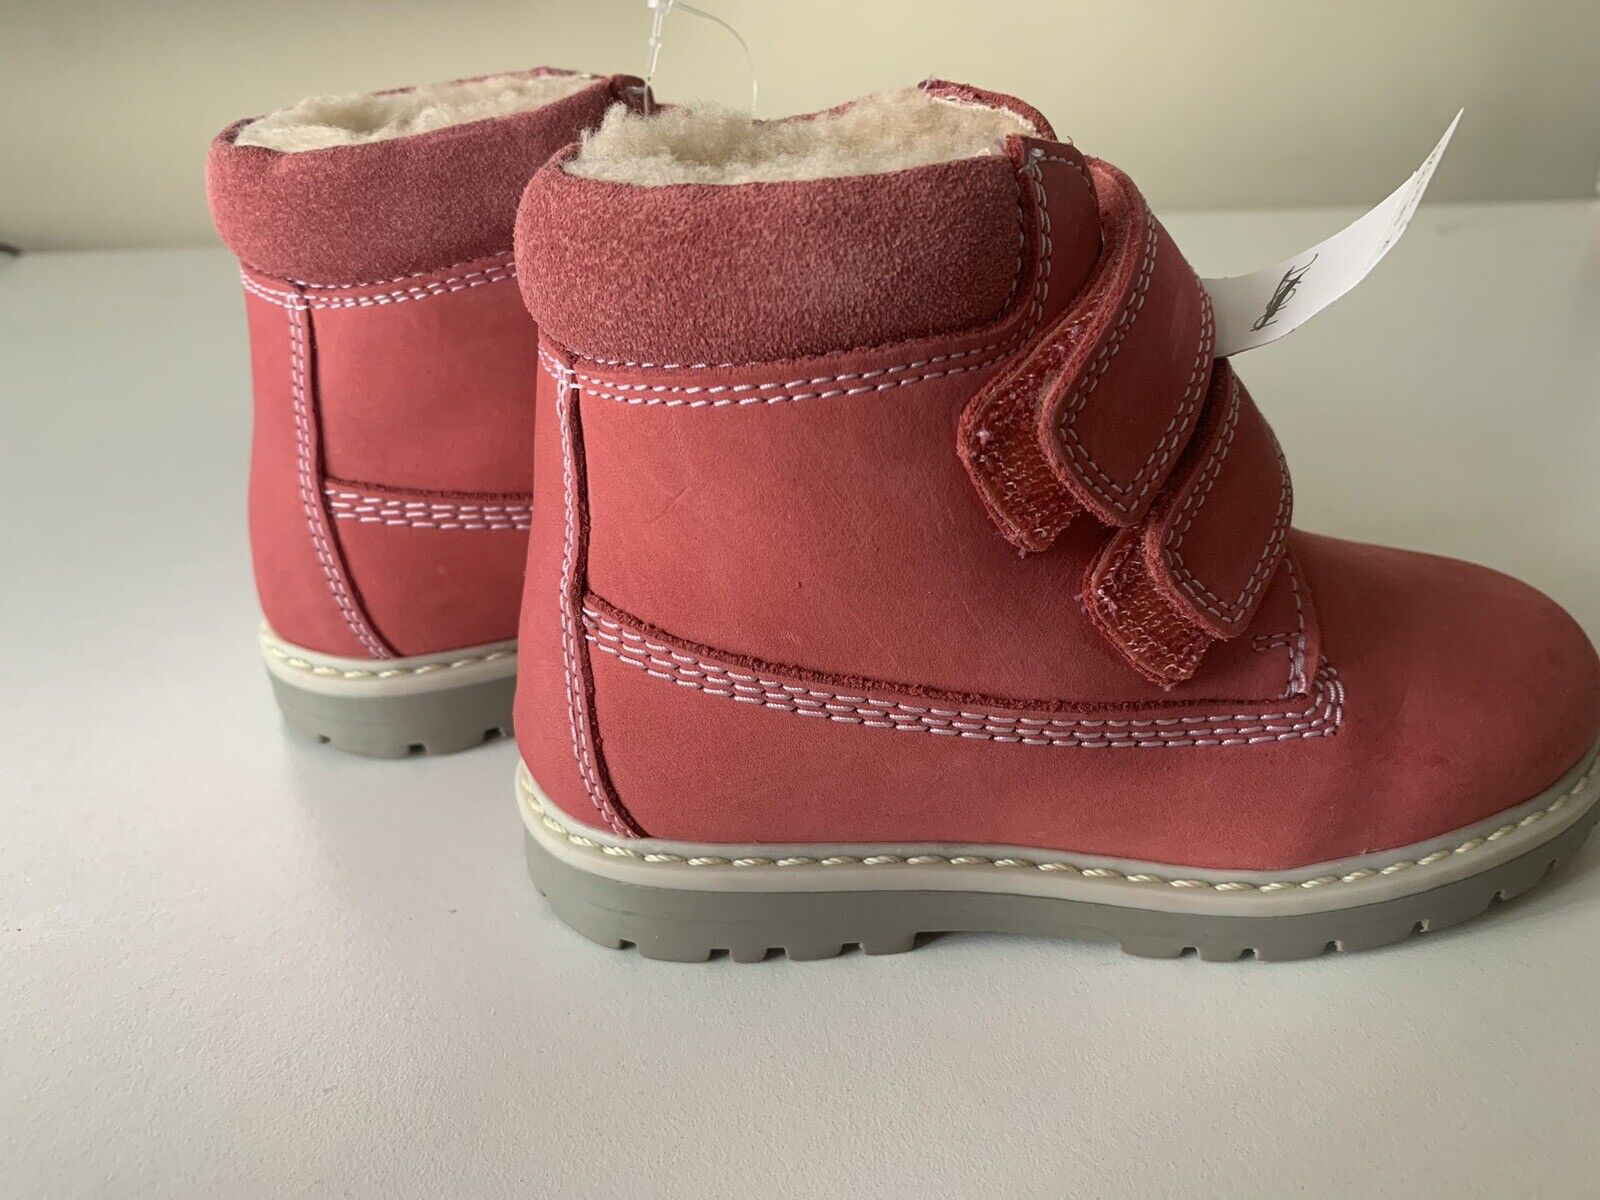 Girls Pink Fleece Lined Faux Fur Warm Winter Ankle Boots Shoes 8 or 11 RRP £30